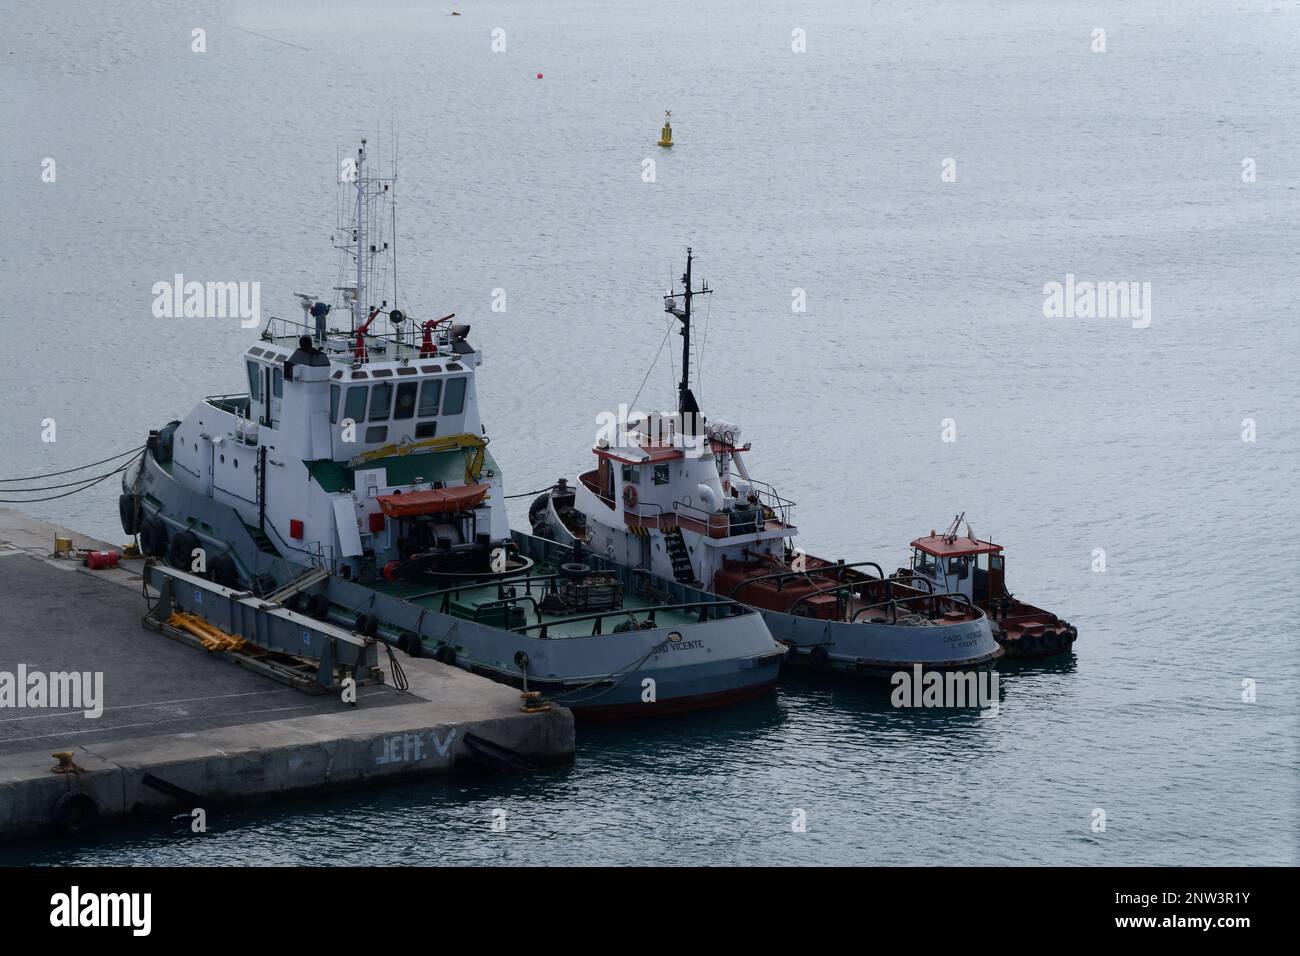 In Porto Grande Harbour Cape Verde Islands a family of different sized service vessels moored together - Large Tug, Small Tug and Pilot Boat Stock Photo